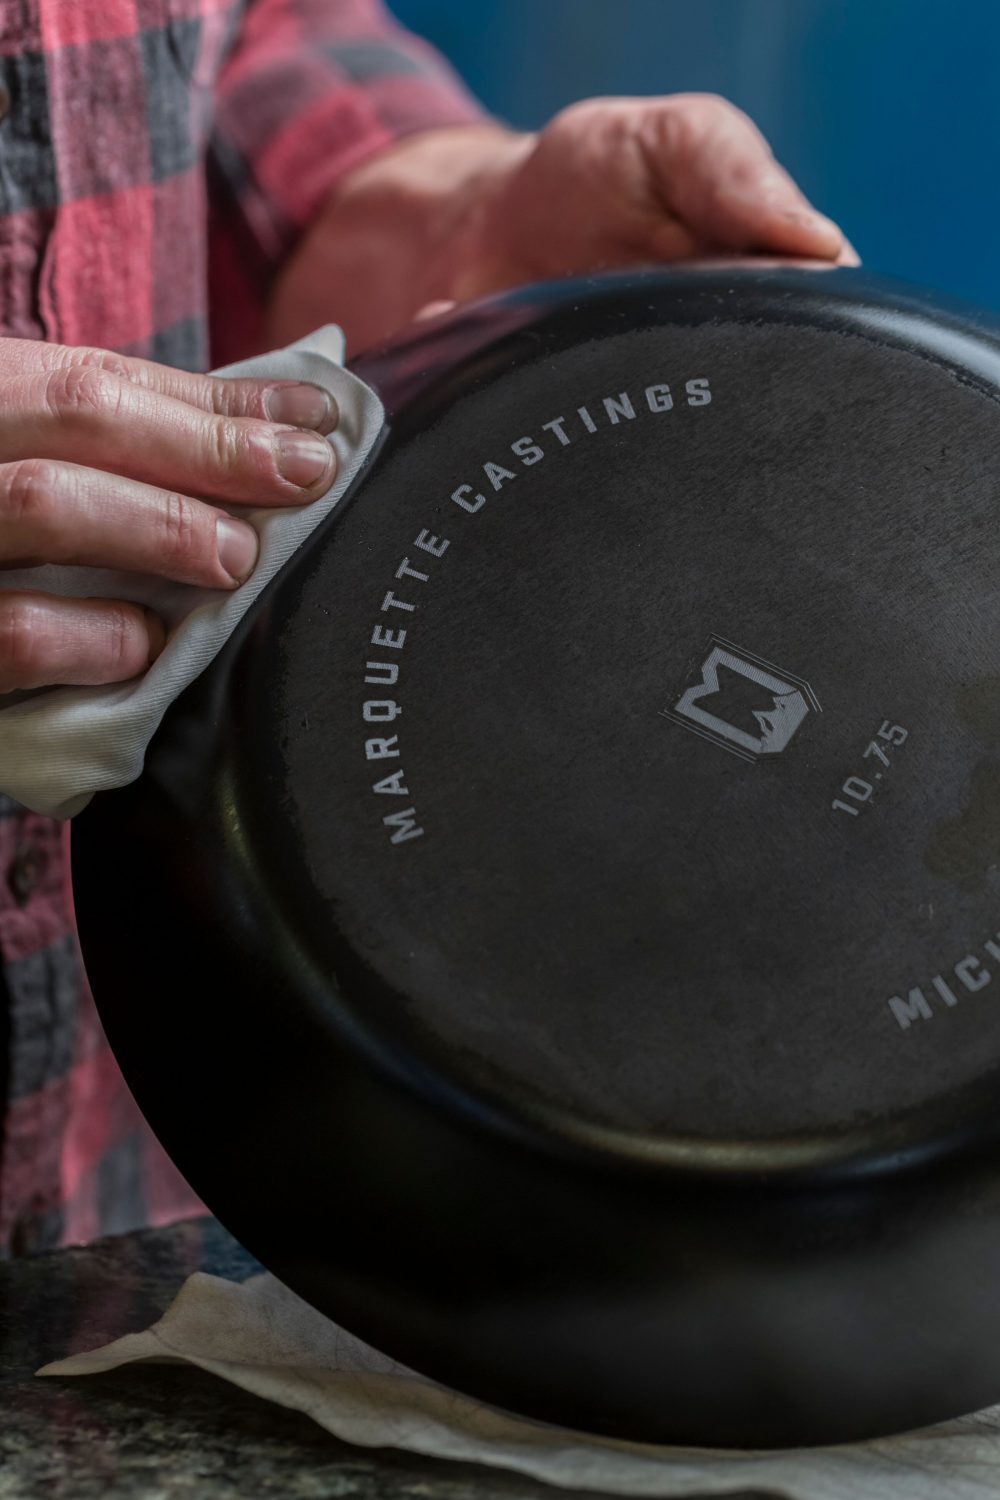 Quality Cast Iron Cookware – Marquette Castings